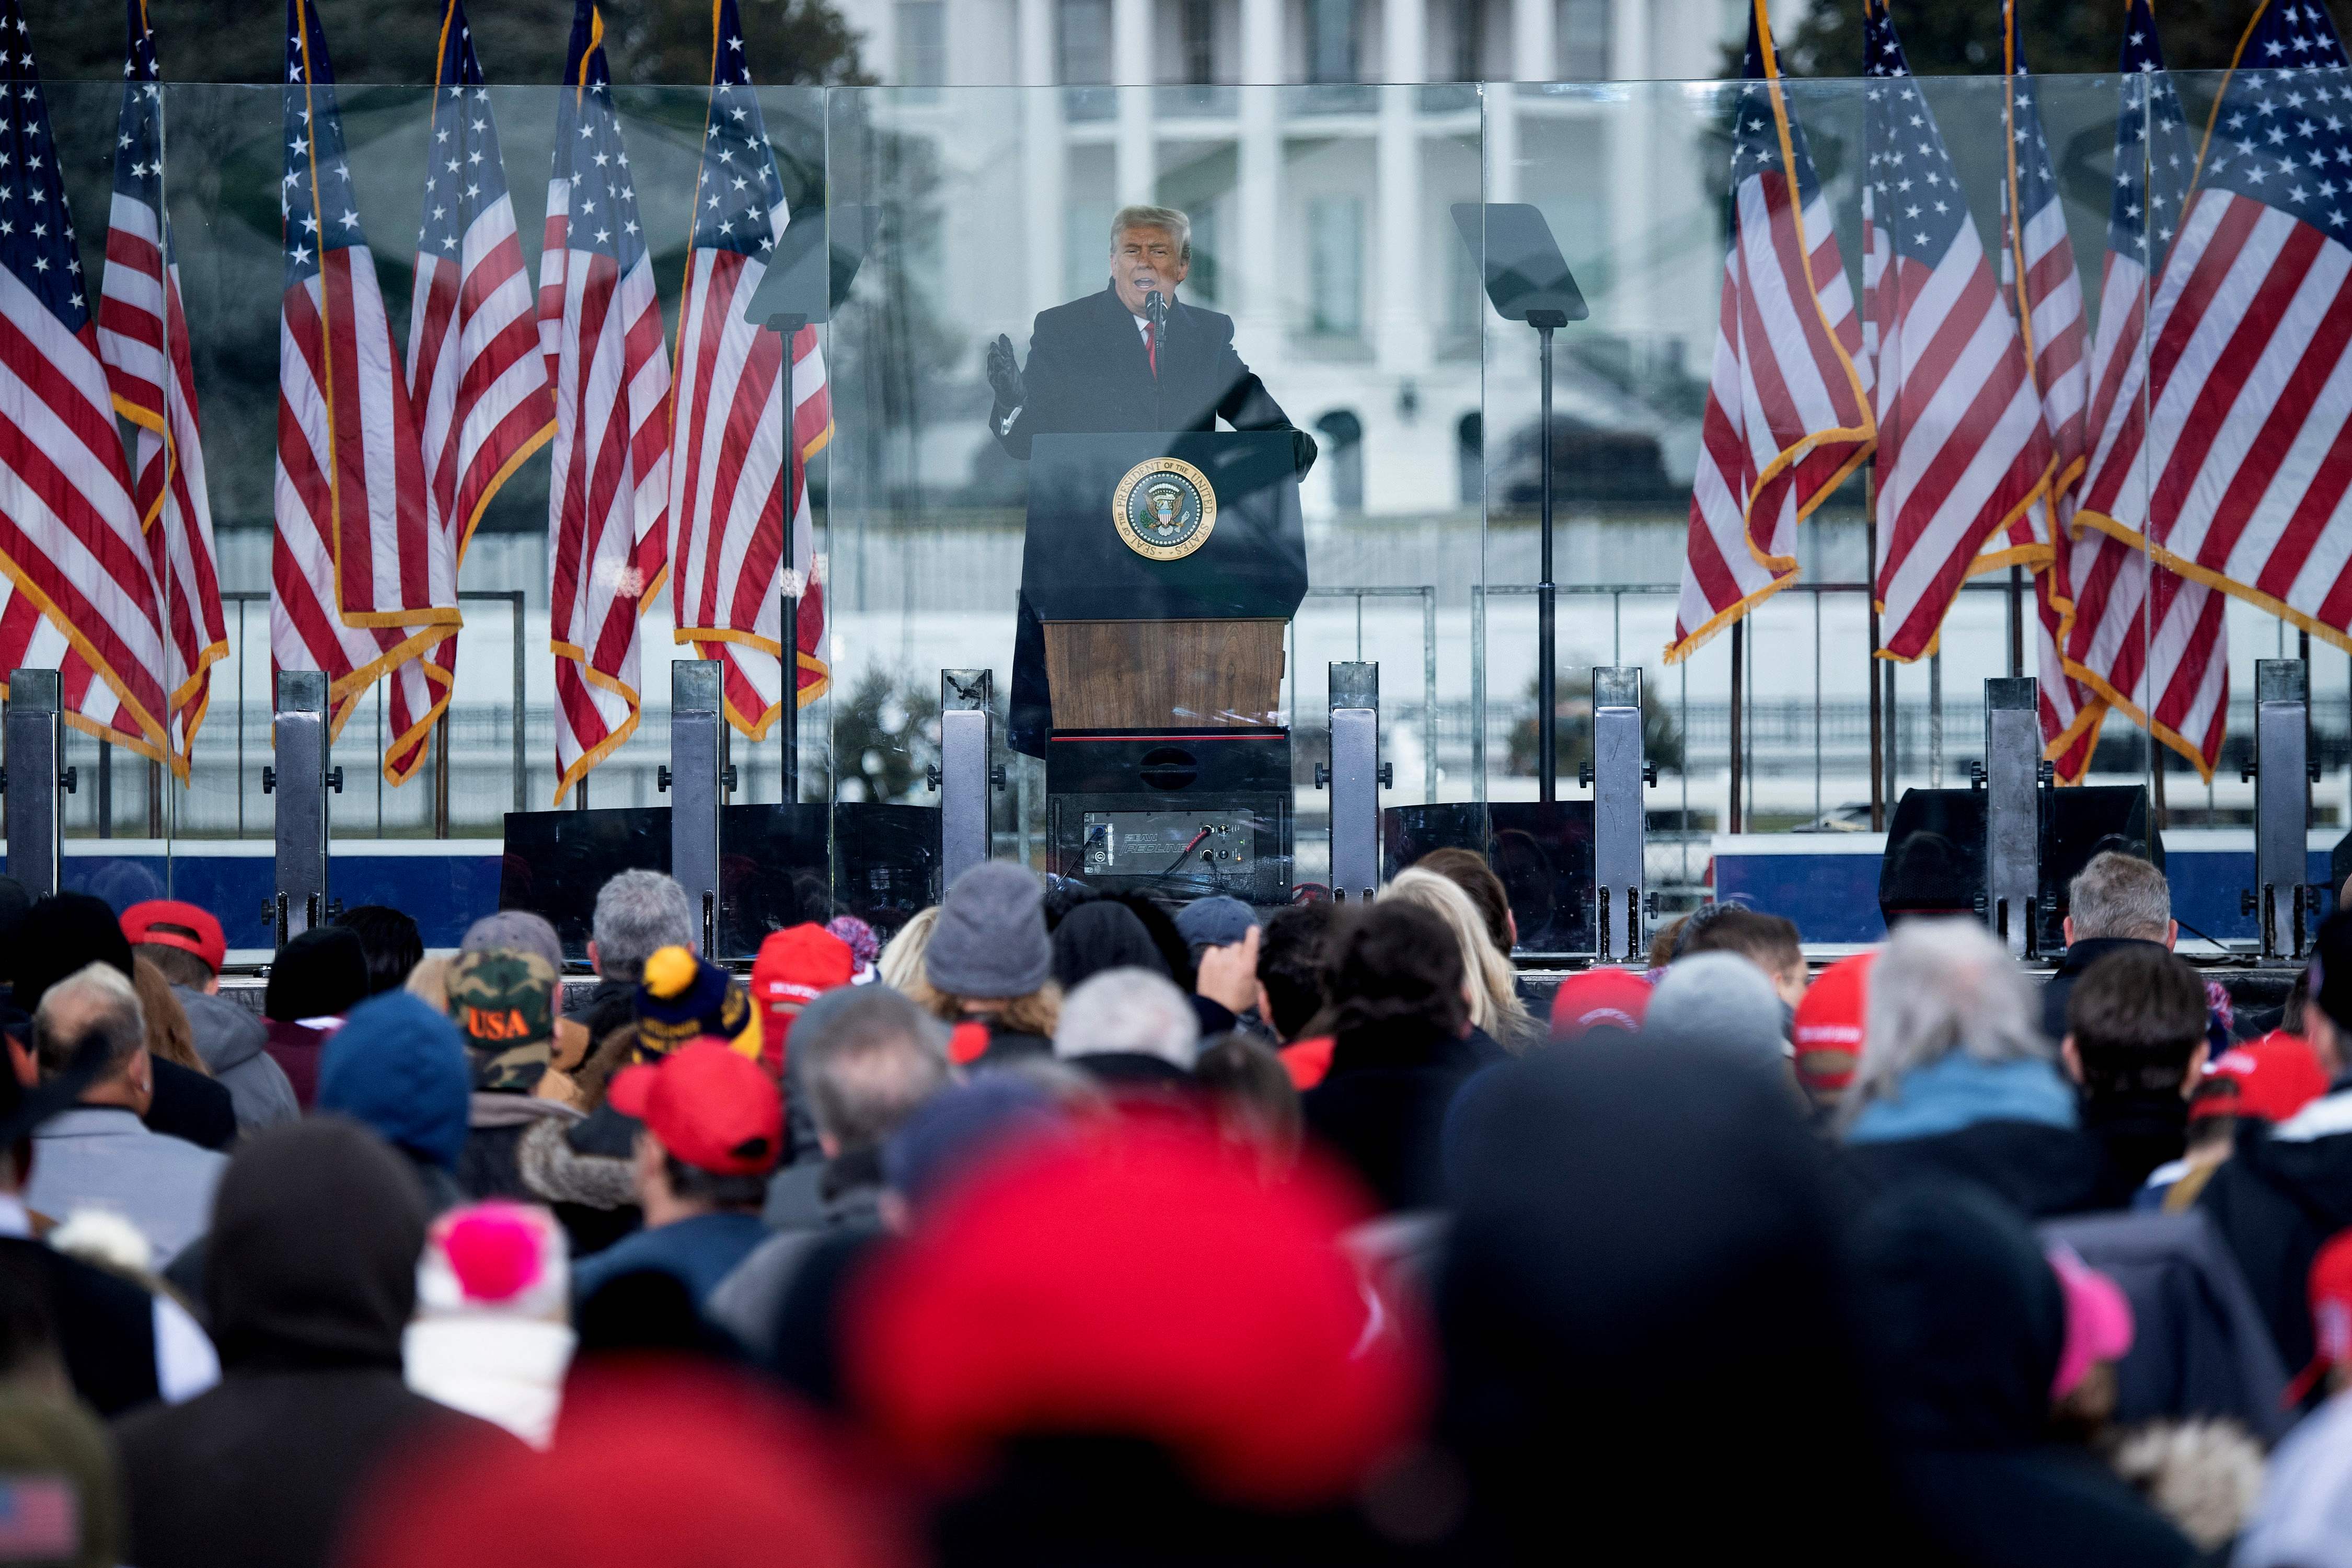 Donald Trump speaks to supporters from The Ellipse near the White House in Washington, DC on 6 January 2021.